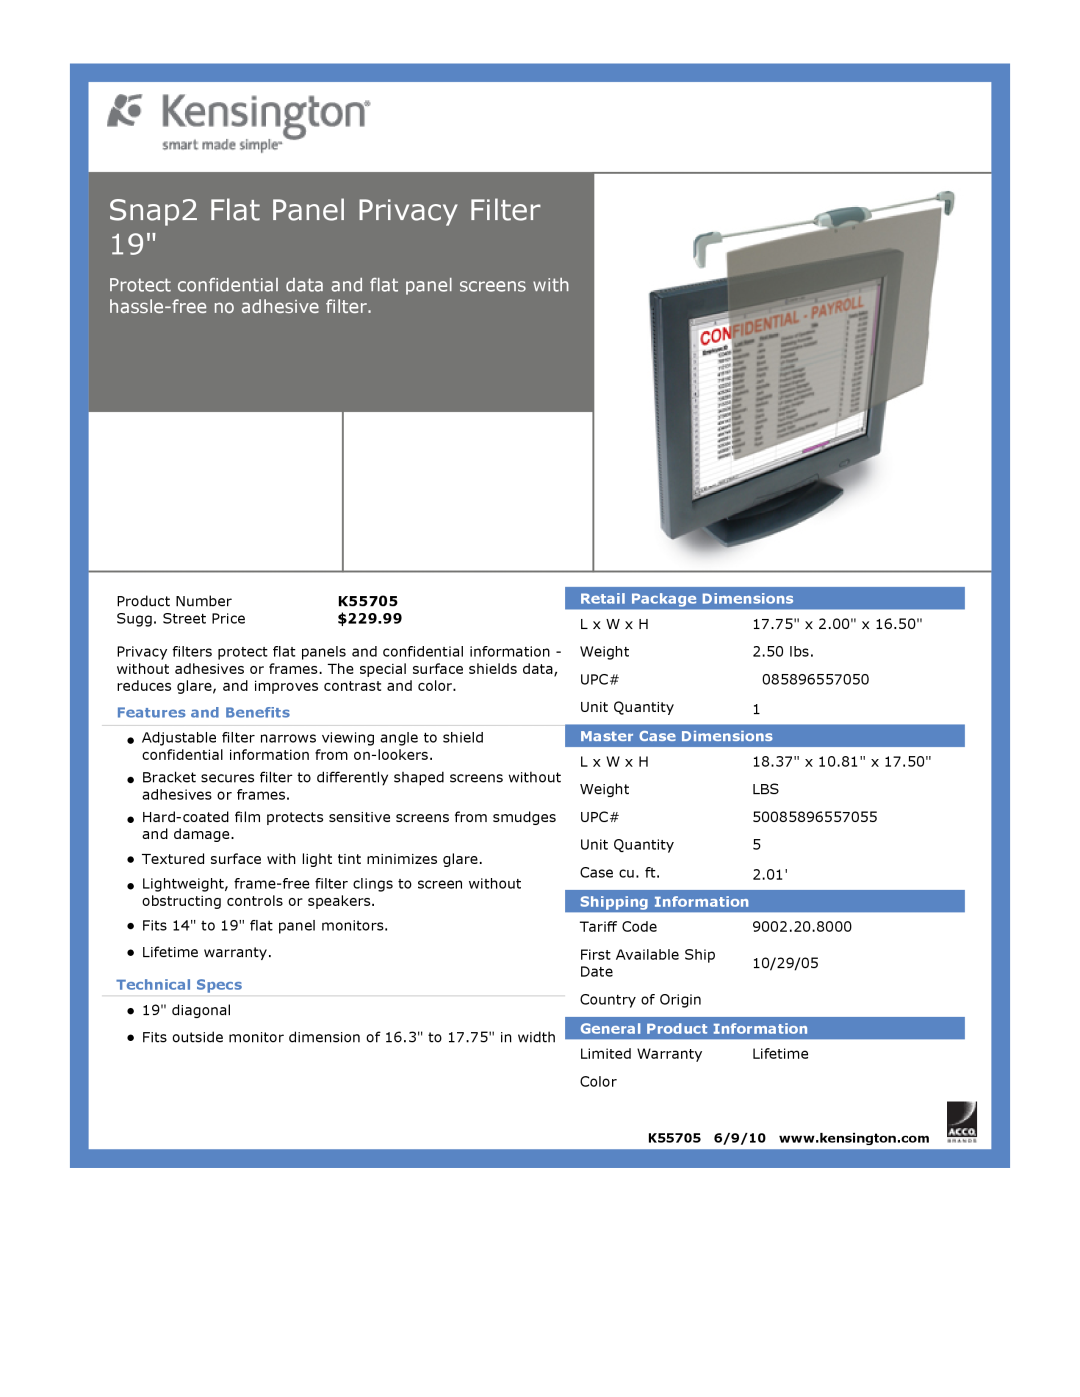 Kensington EU64325 K55705, Snap2 Flat Panel Privacy Filter, Features and Benefits, Technical Specs, Master Case Dimensions 